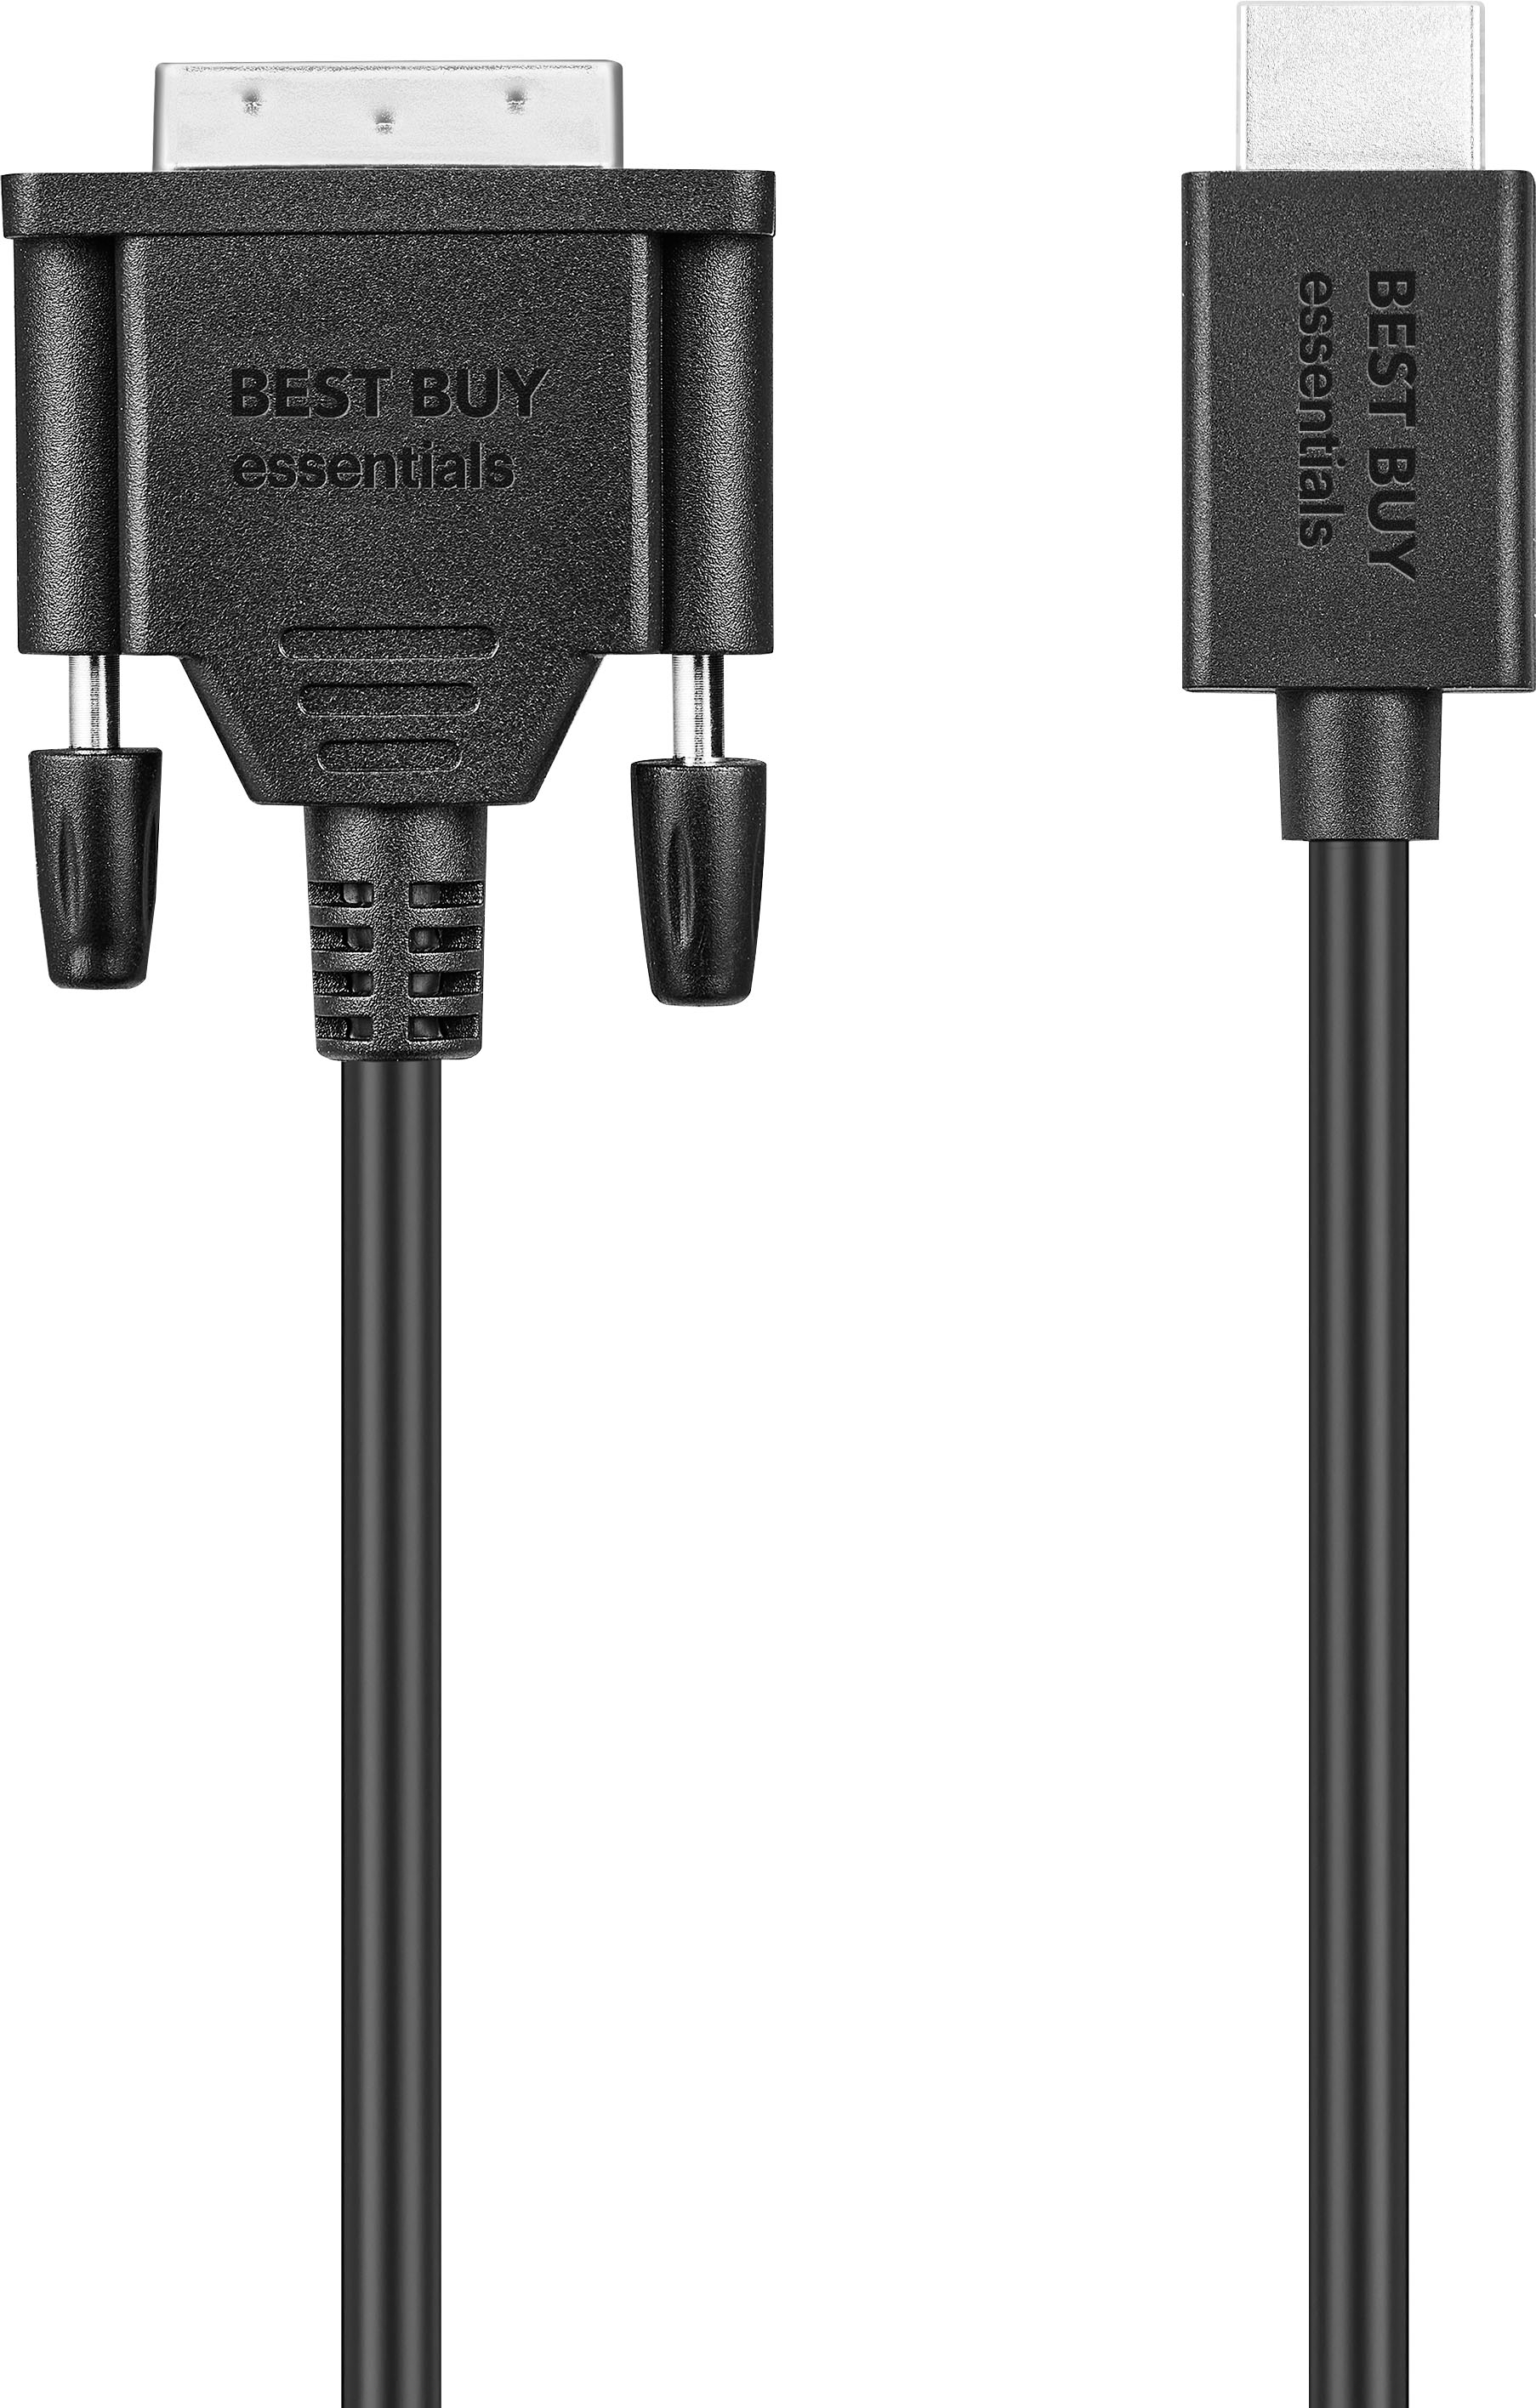 Rankie HDMI to DVI Cable, CL3 Rated High Speed Bi-Directional, 6 Feet, Black